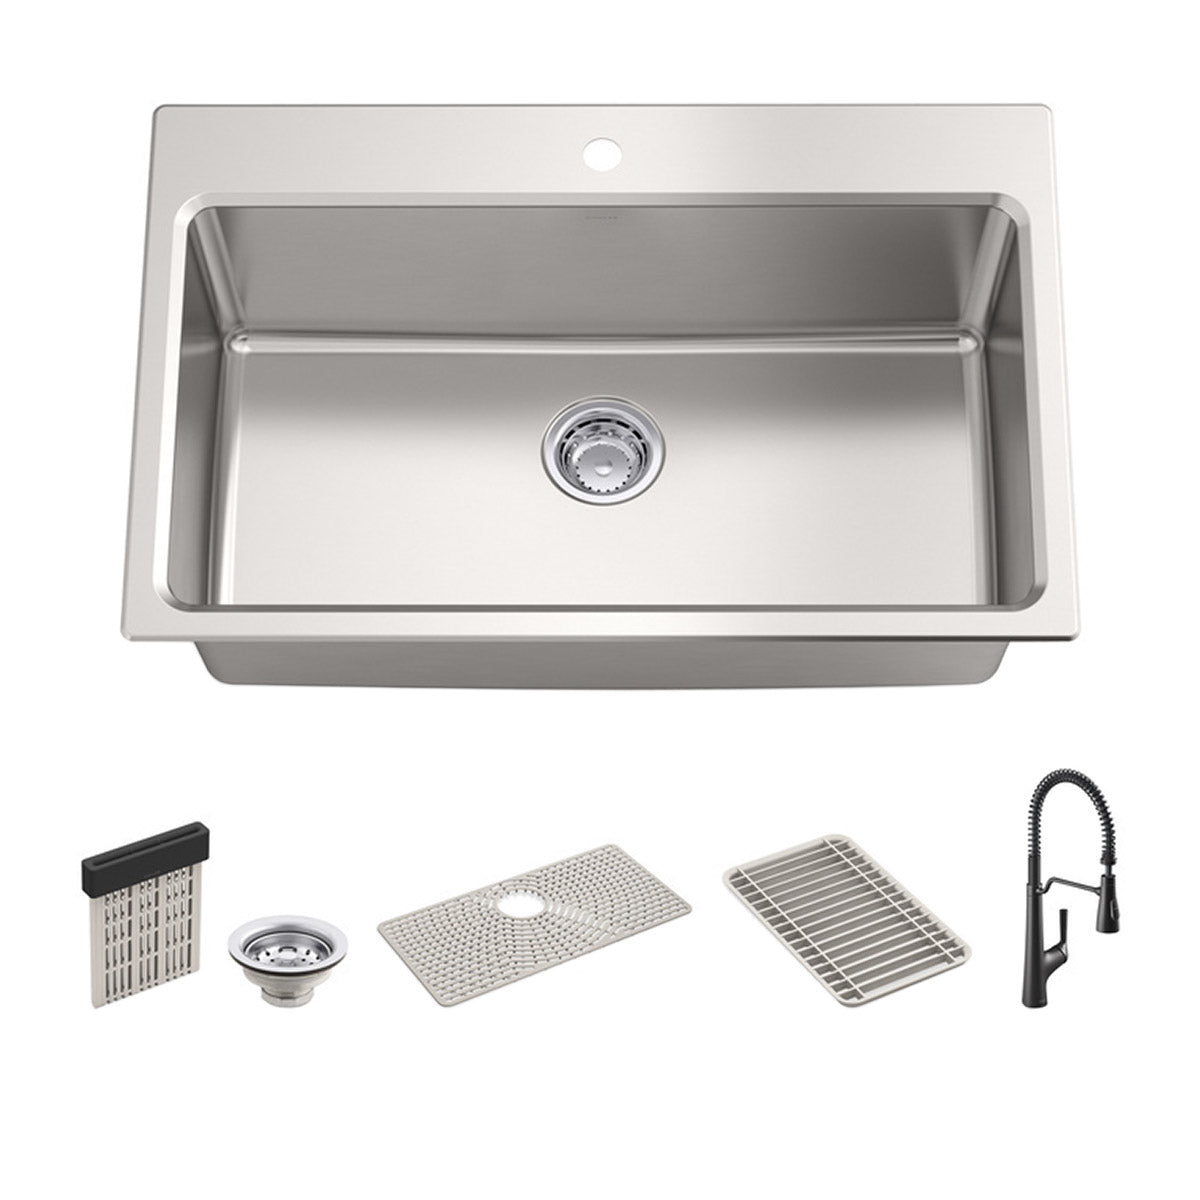 Pro-Function Kitchen Sink Kit - with Vibrant Stainless or Matte Black Faucet